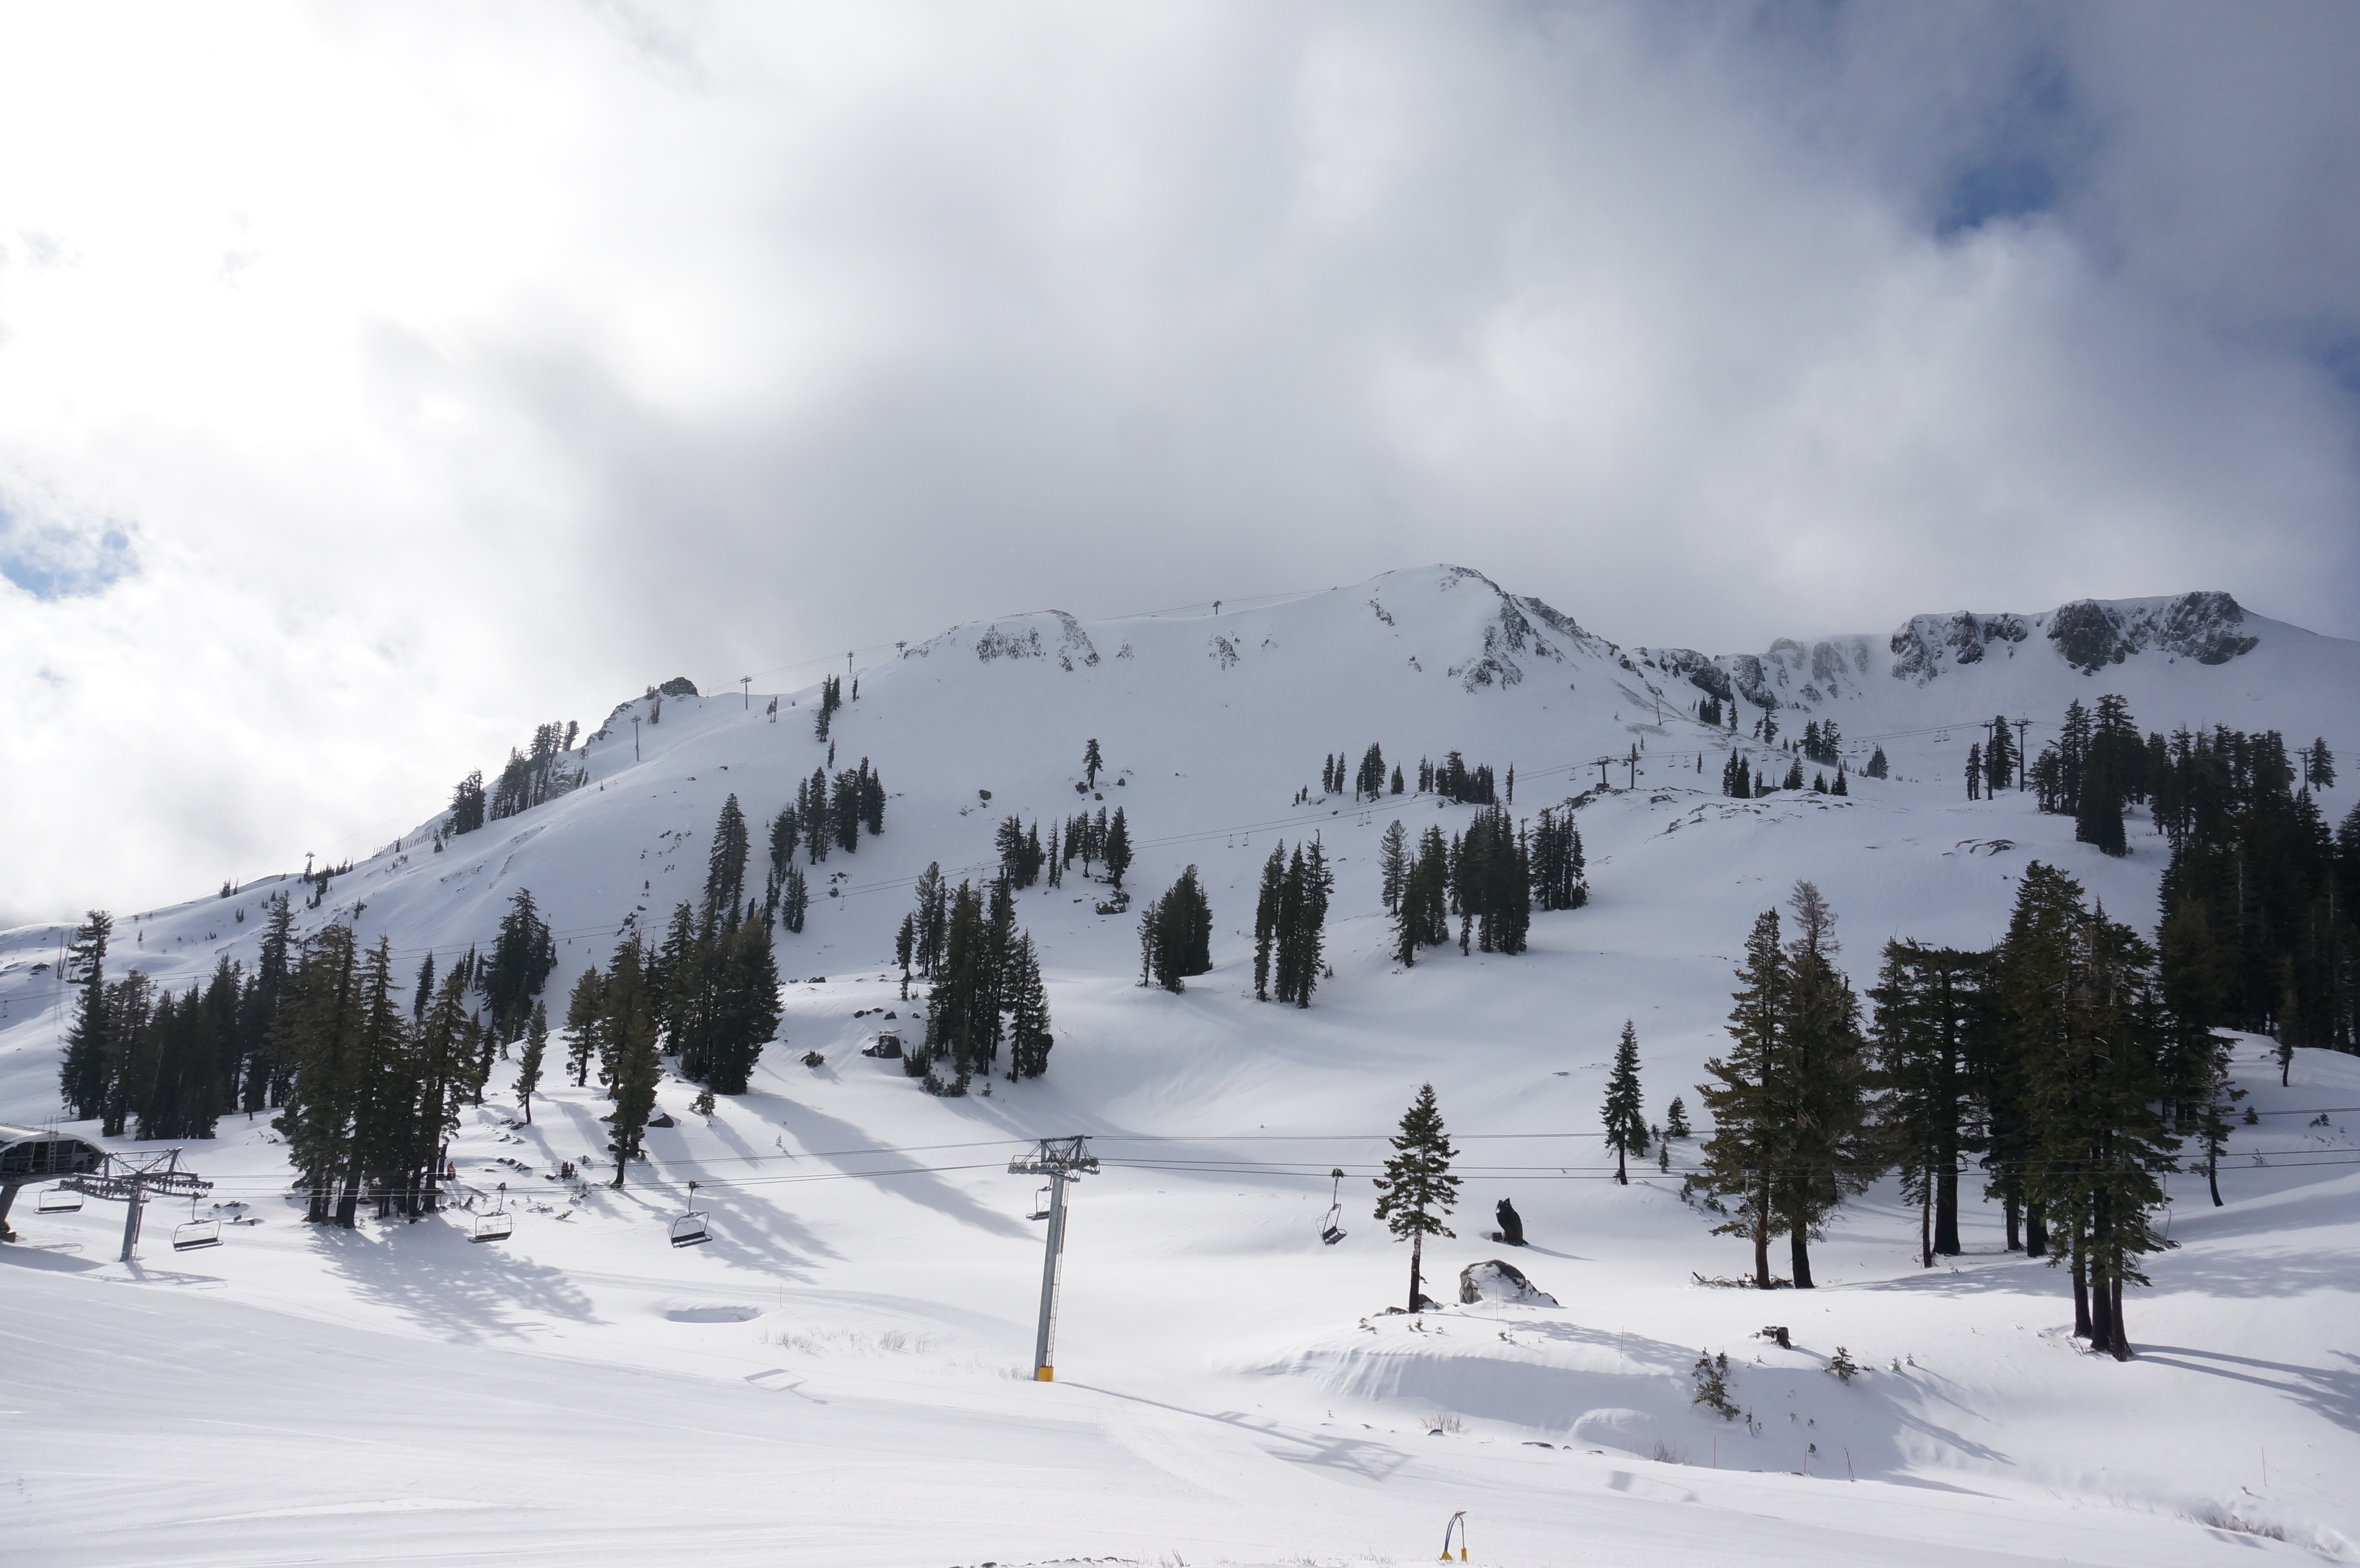 Squaw Valley received nearly 2 feet of snow during the weekend, and the resort has 14 lifts running, accessing 23 runs. (Squaw Valley photo)